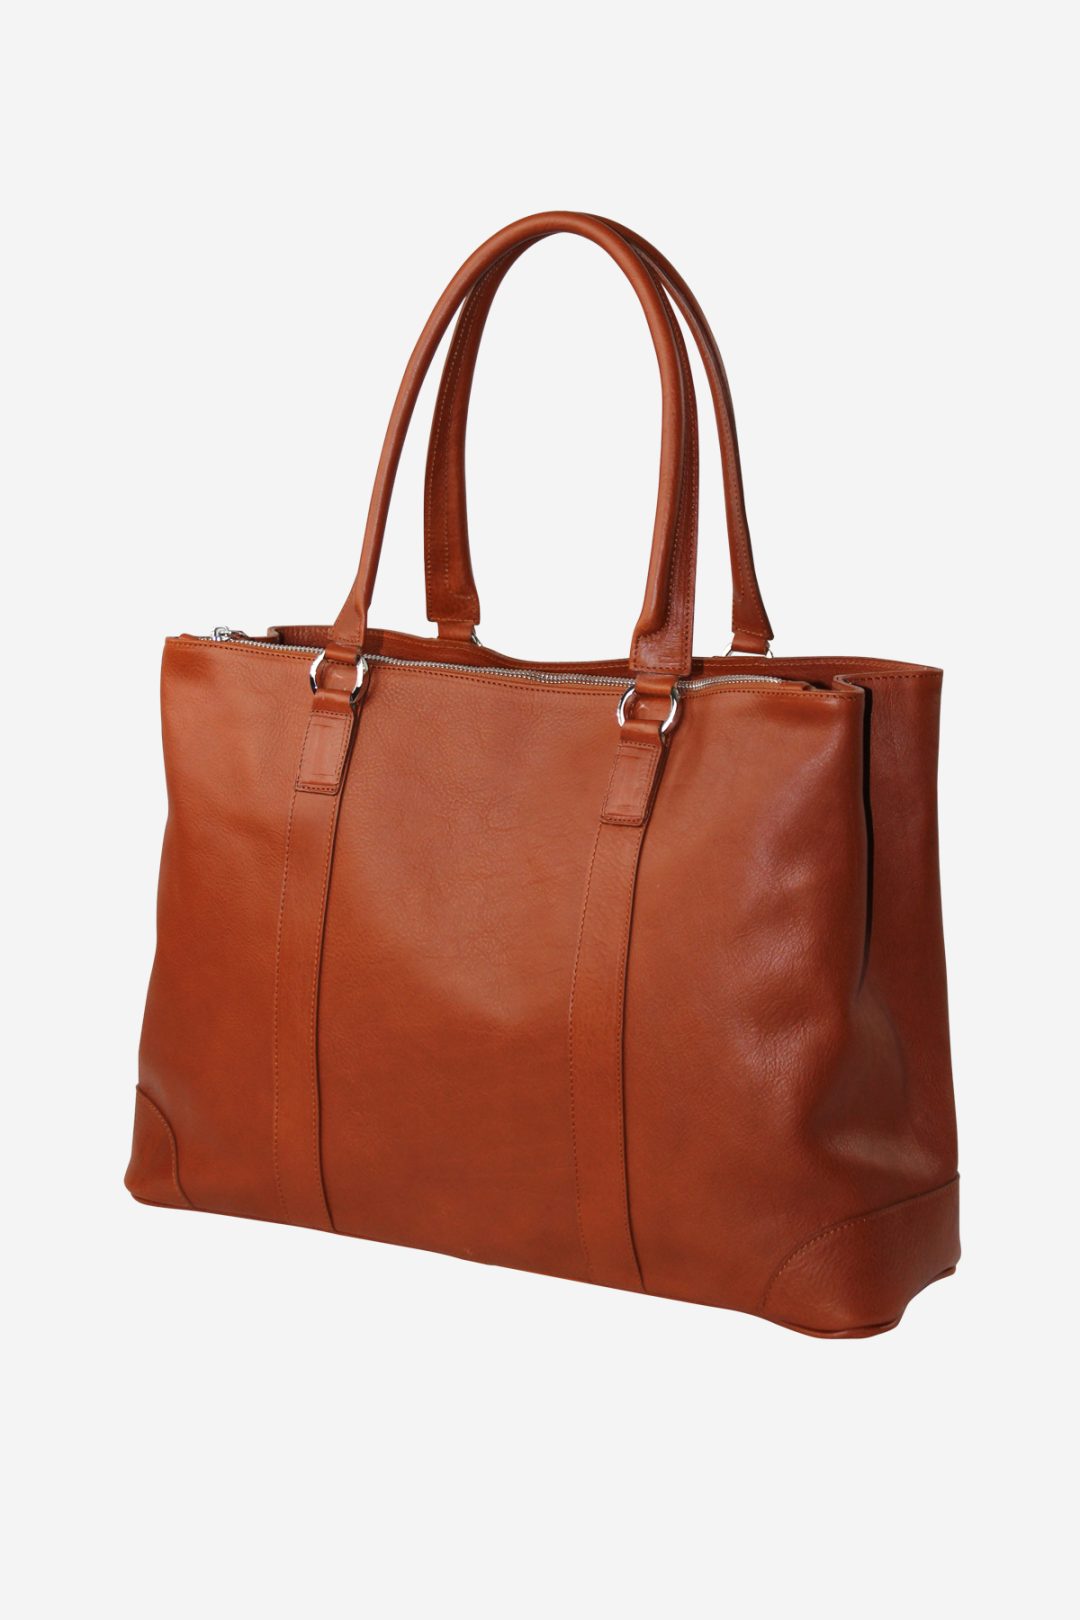 Tuscan Handcrafted Leather Bag